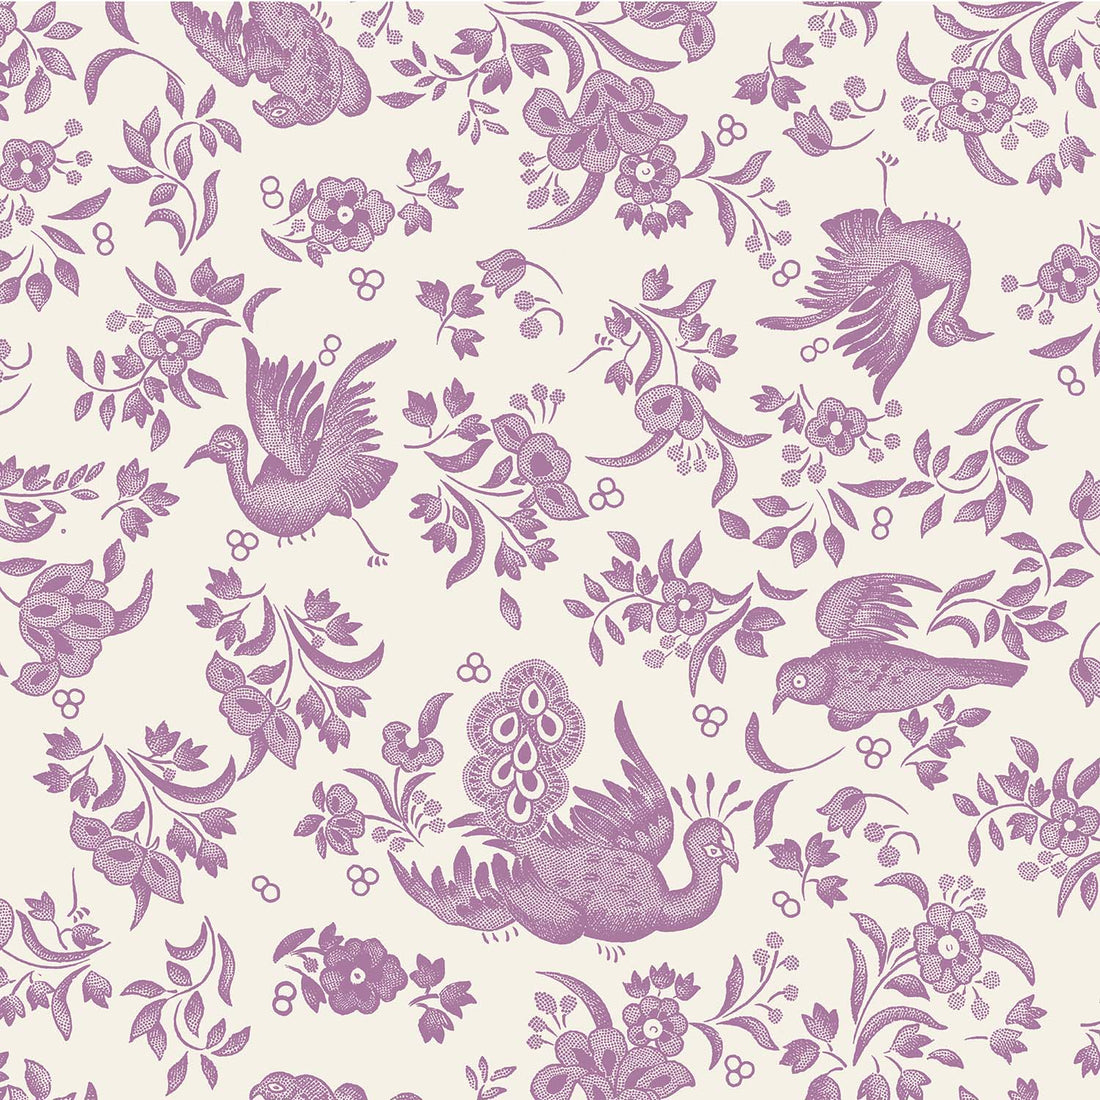 A square cocktail napkin featuring a lilac purple bird and floral pattern on a white background, inspired by the ornamental bird pattern from Burleigh.